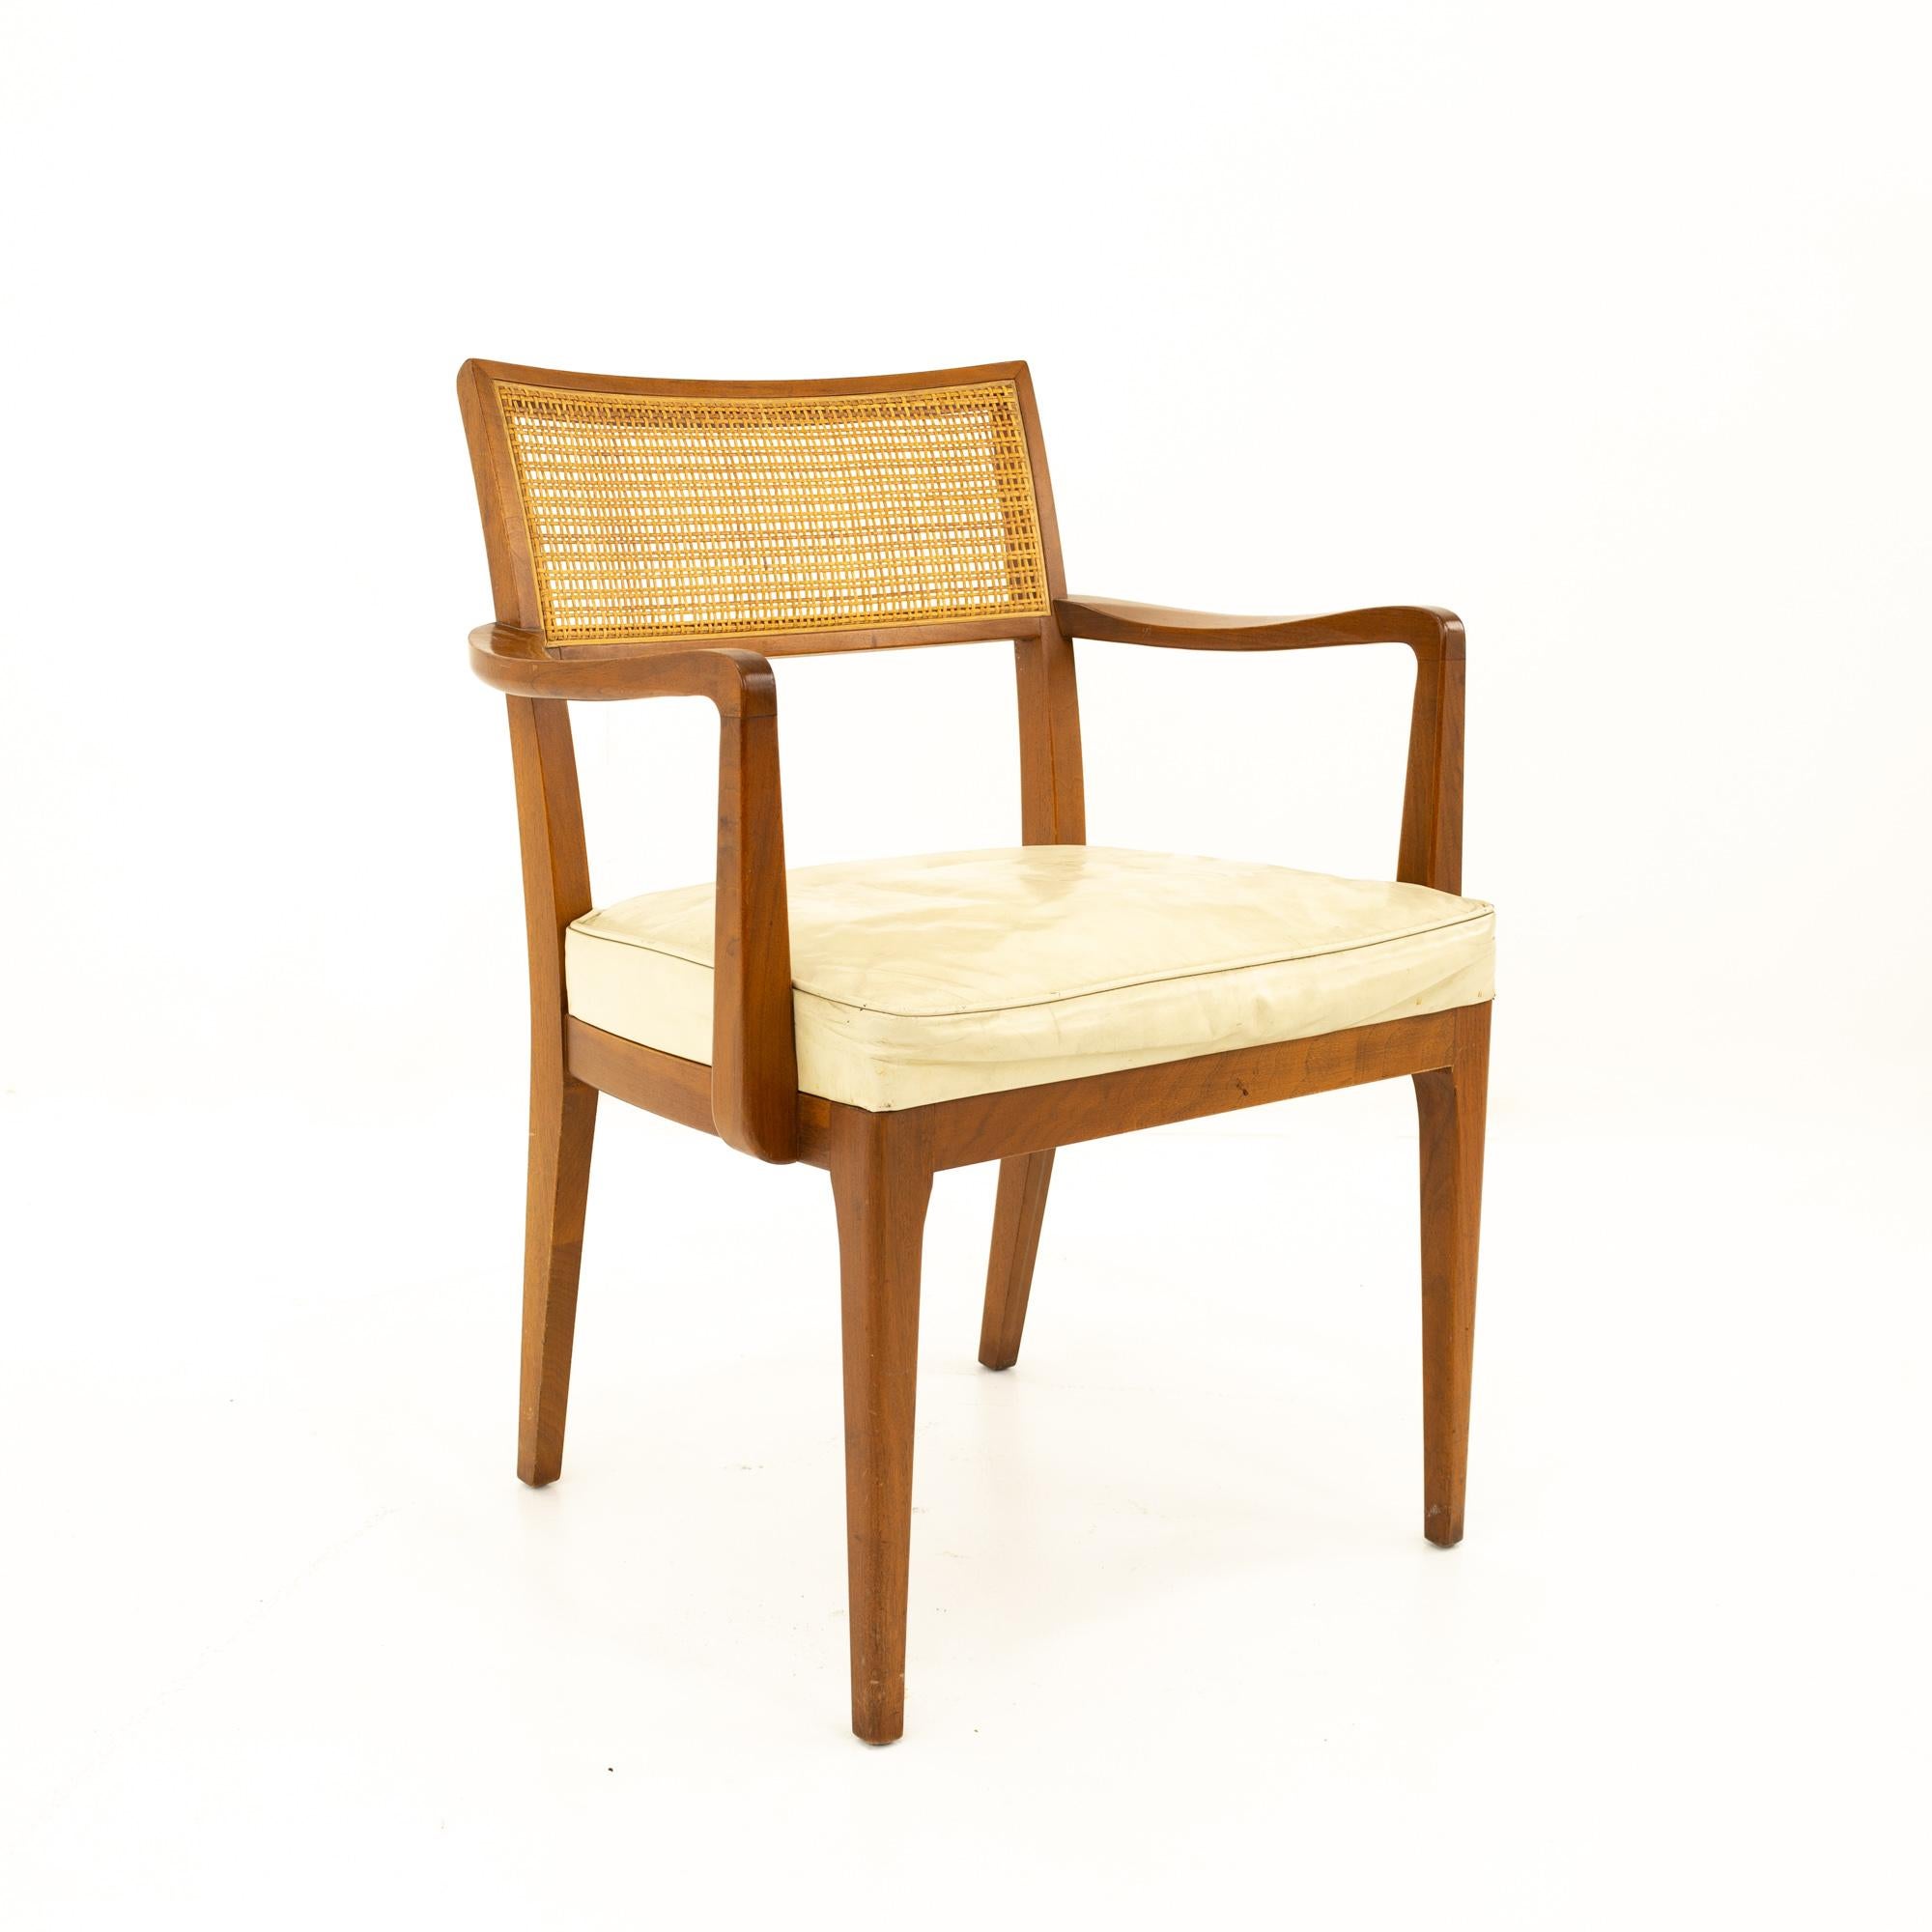 American Sligh Furniture Midcentury Dining Chairs, Pair